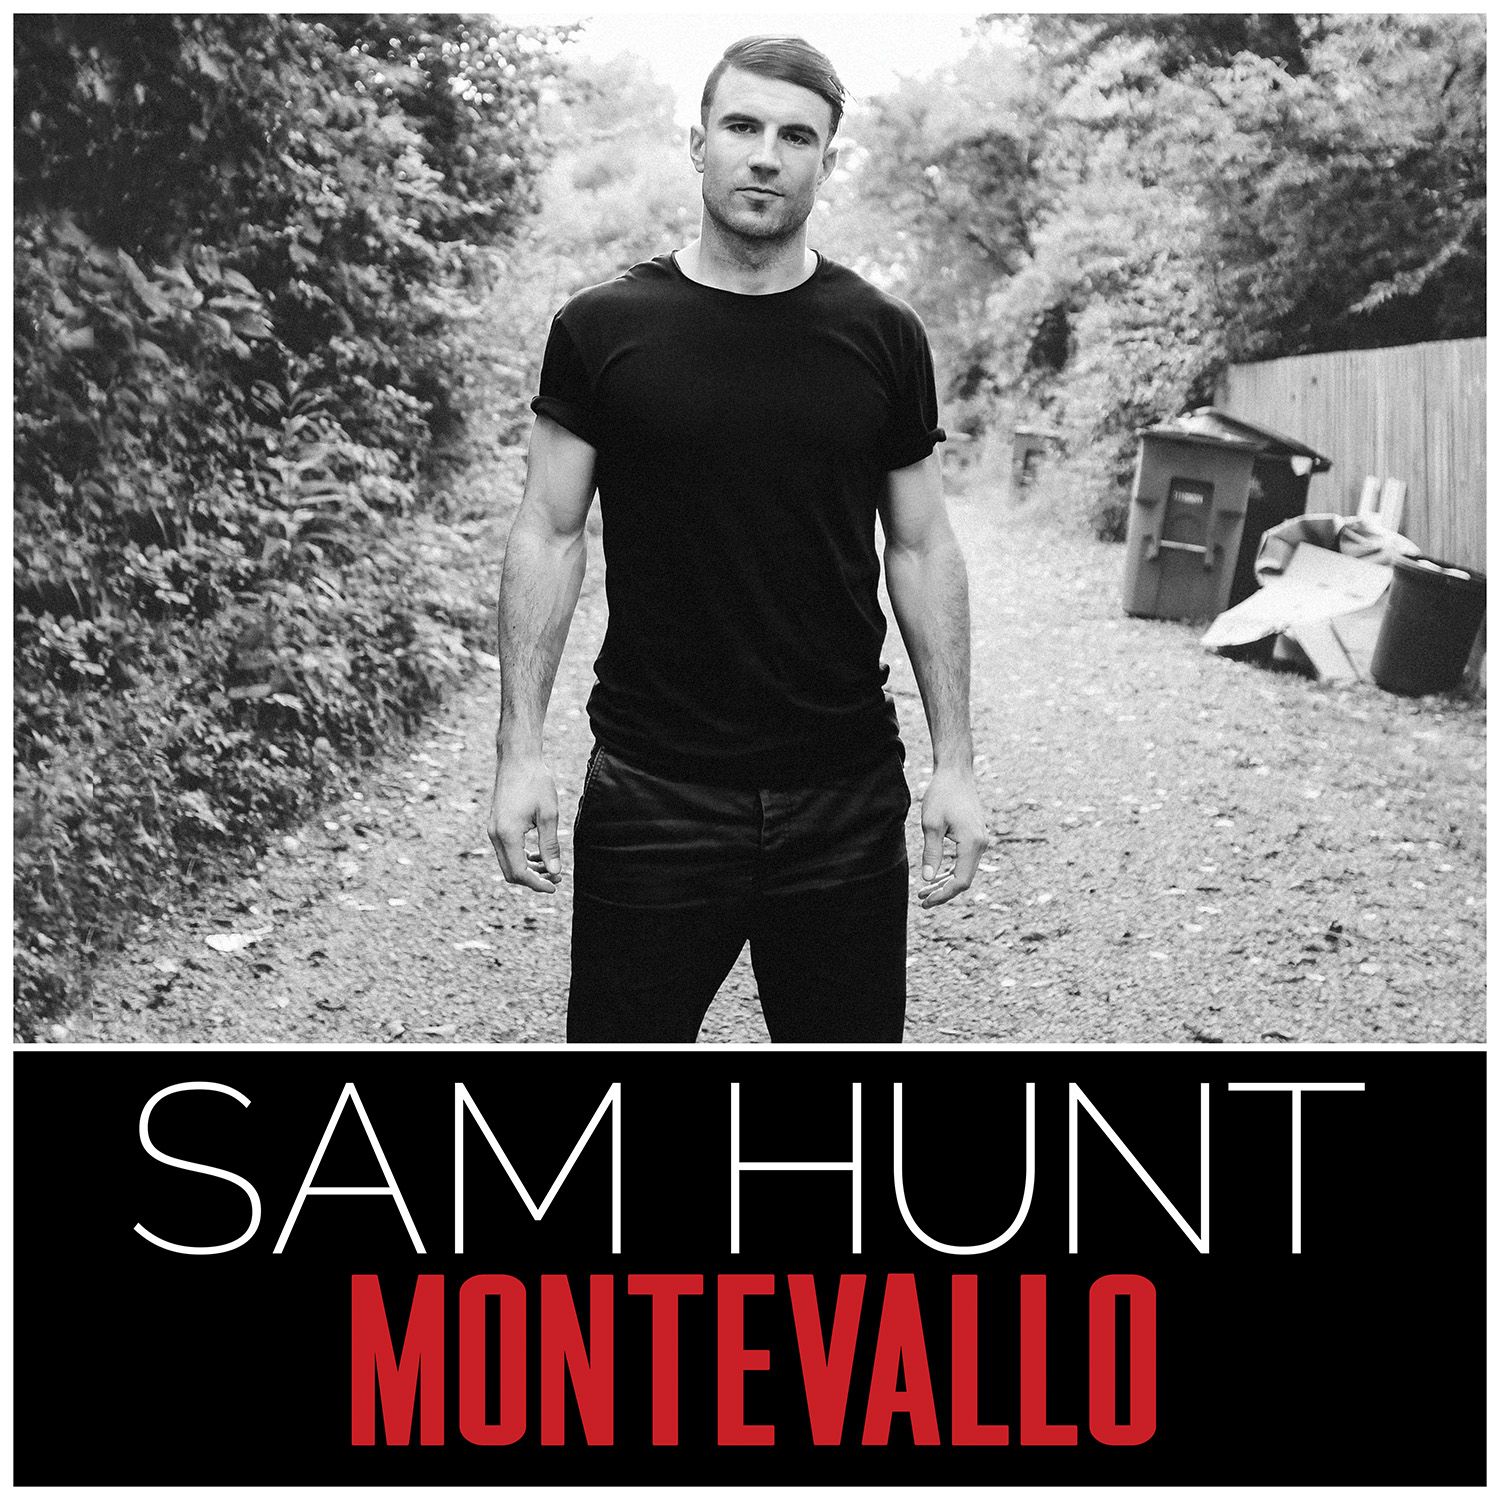 SAM HUNT DELIVERS COUNTRY MUSIC’S BEST-SELLING DEBUT ALBUM SINCE 2011